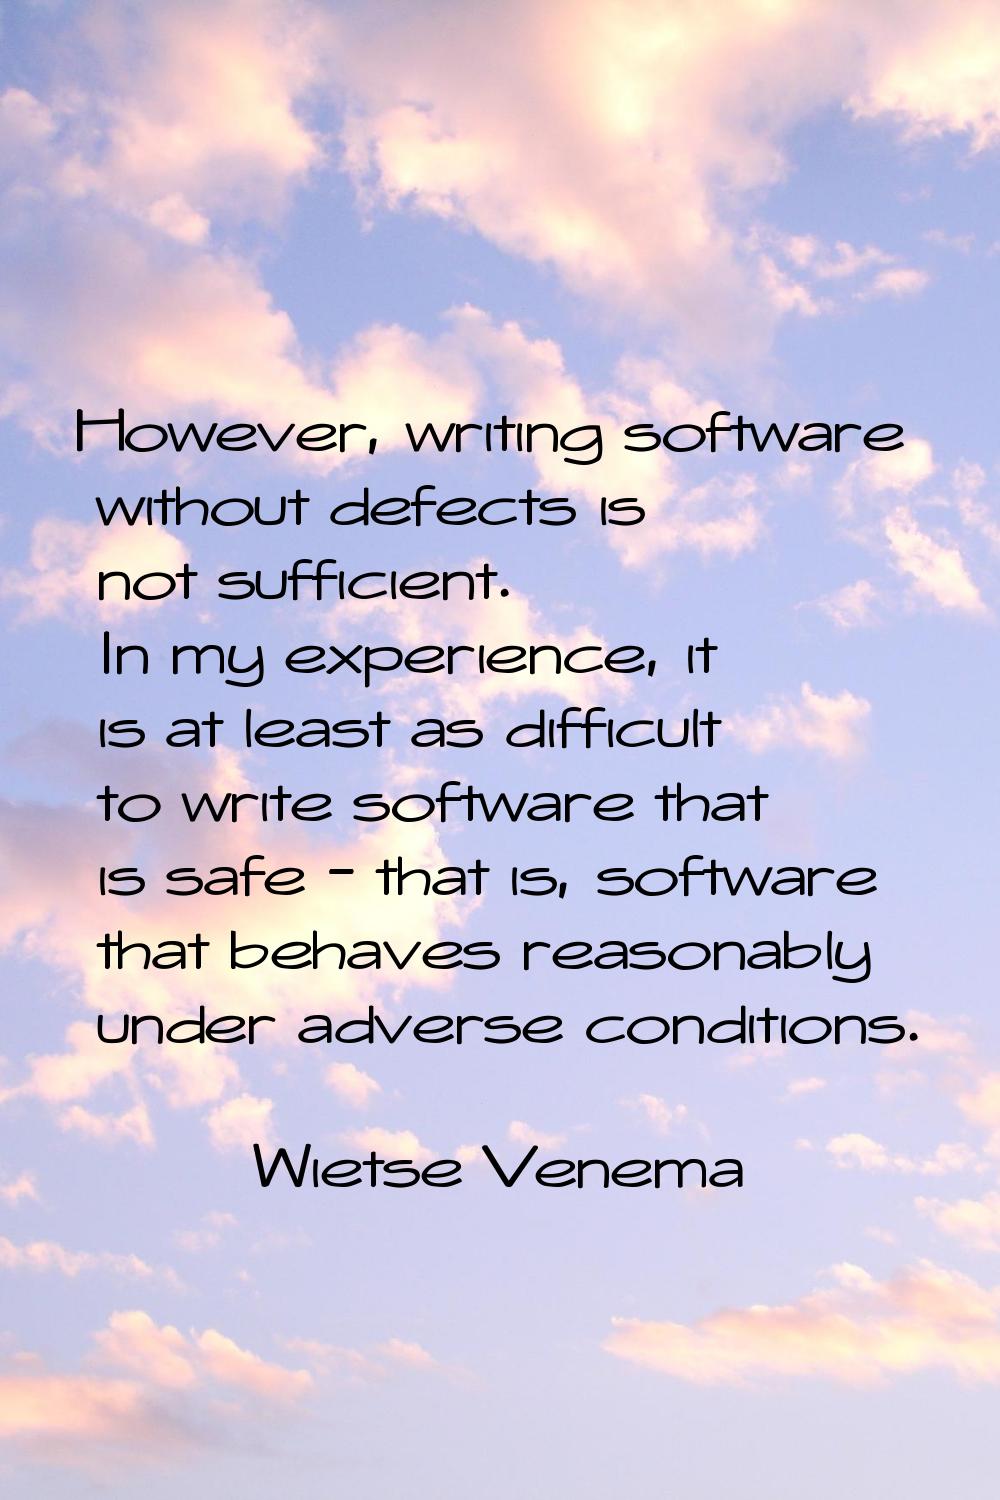 However, writing software without defects is not sufficient. In my experience, it is at least as di